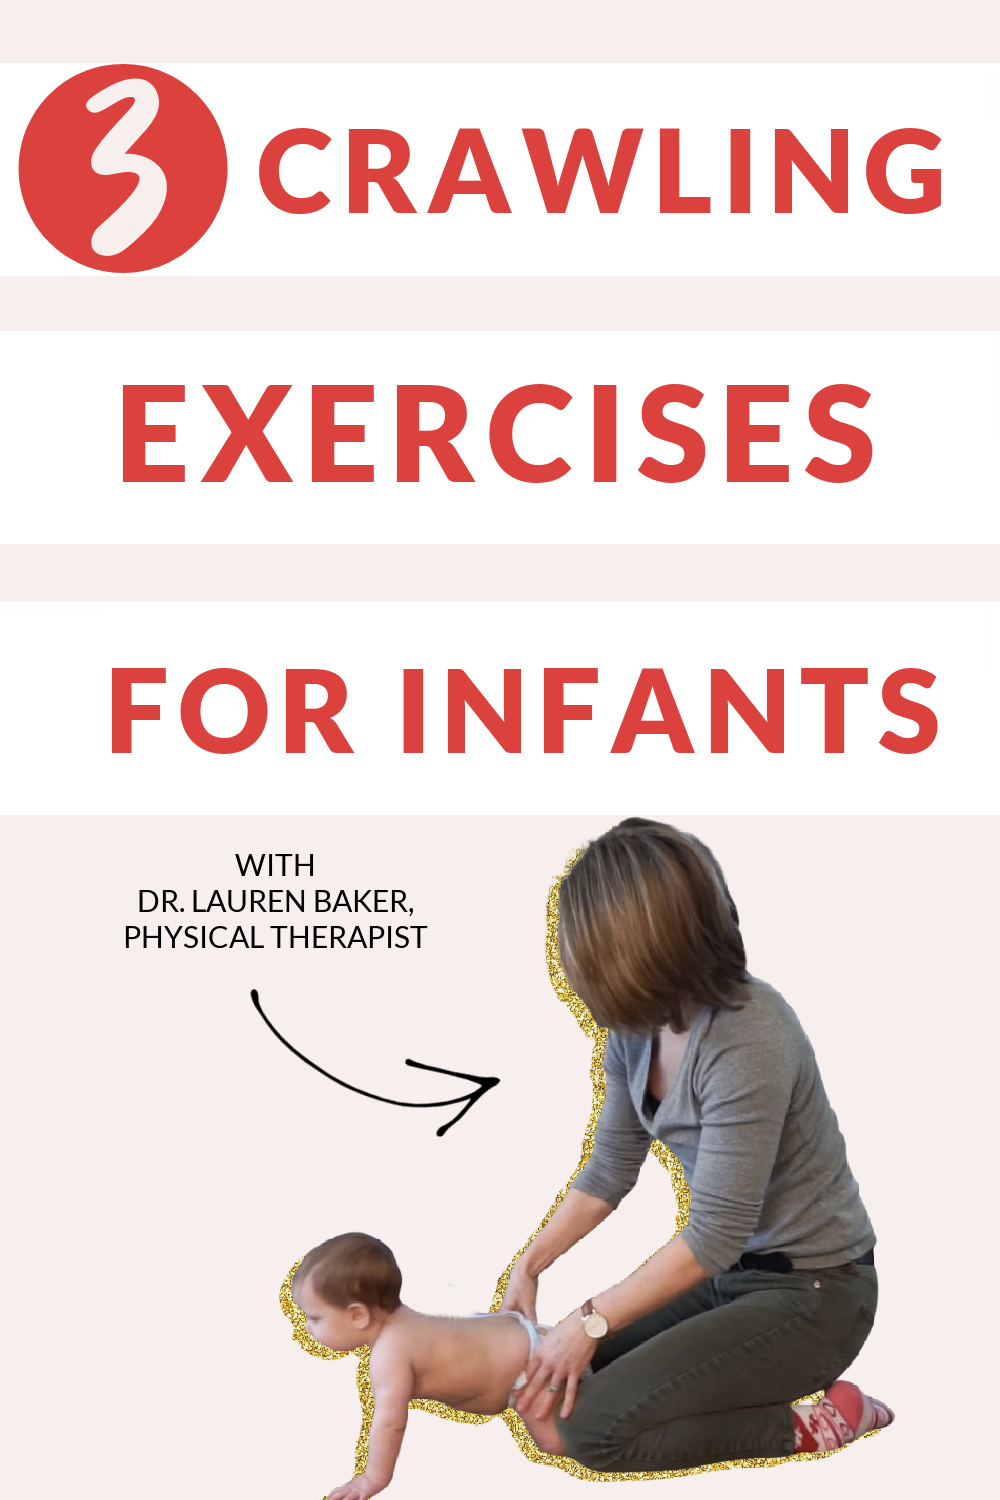 3 Crawling Exercises For Infants — In Home Pediatric Physical